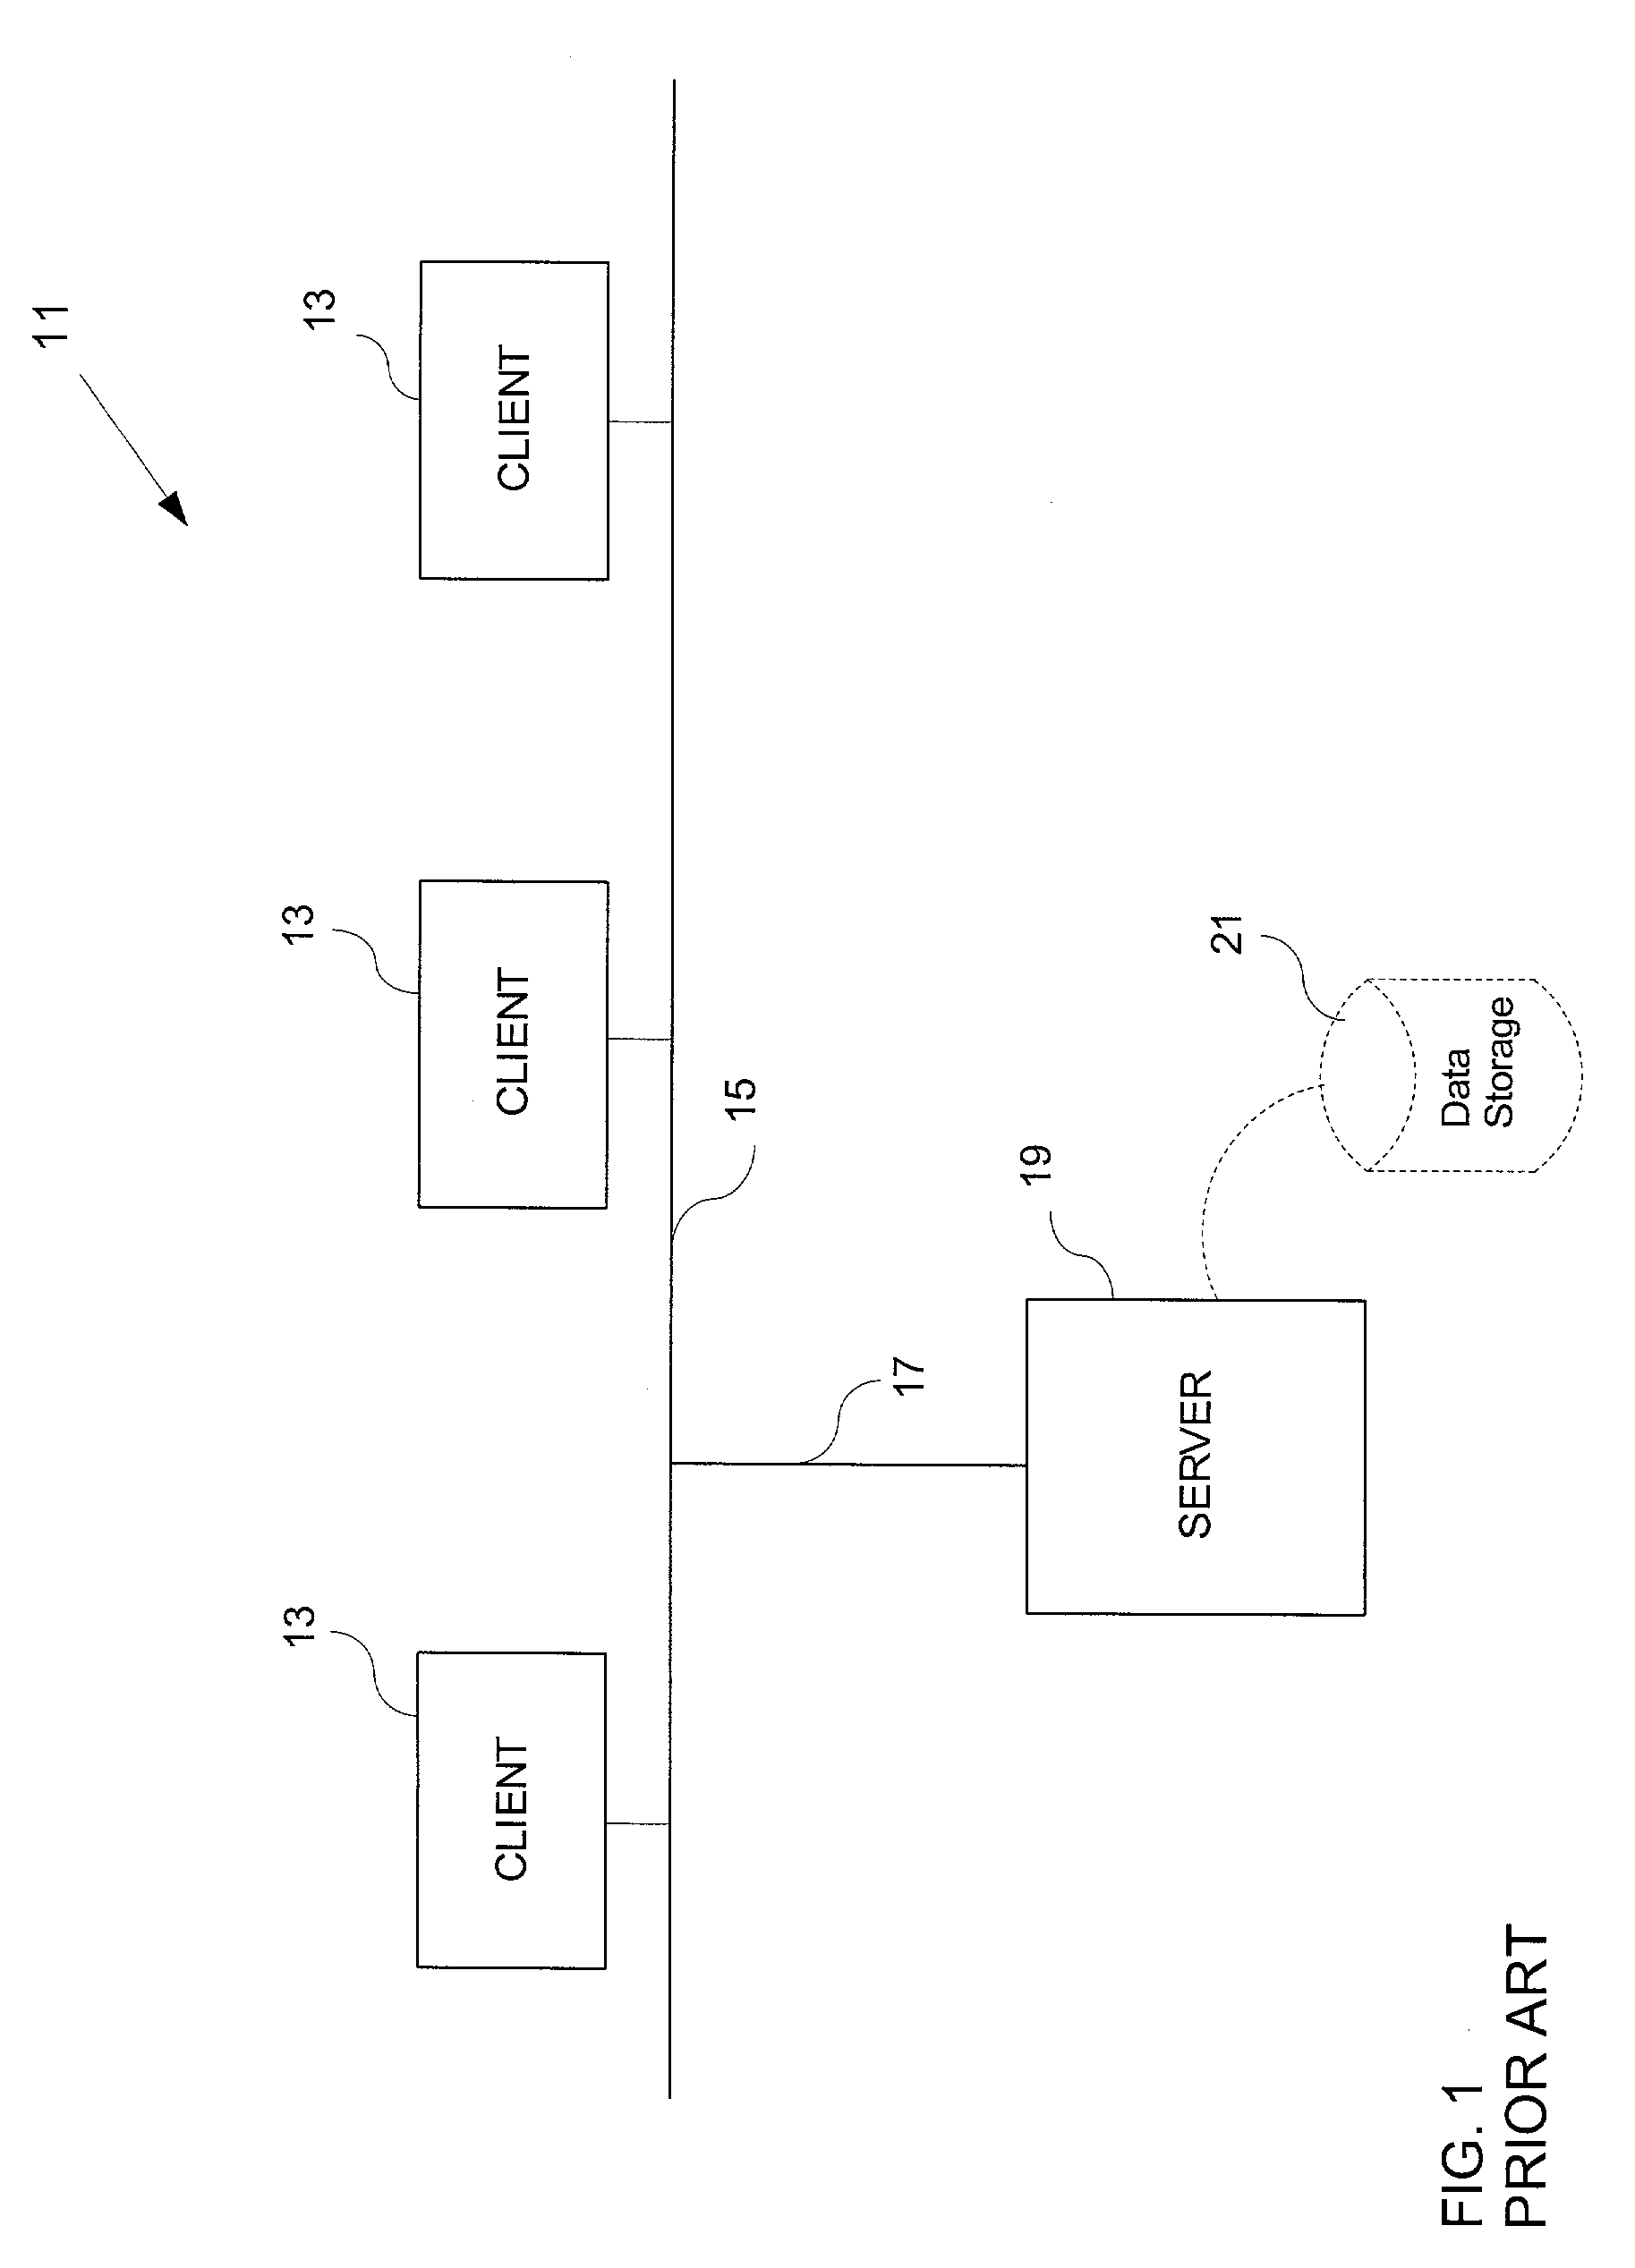 Method and system for migrating data while maintaining hard links